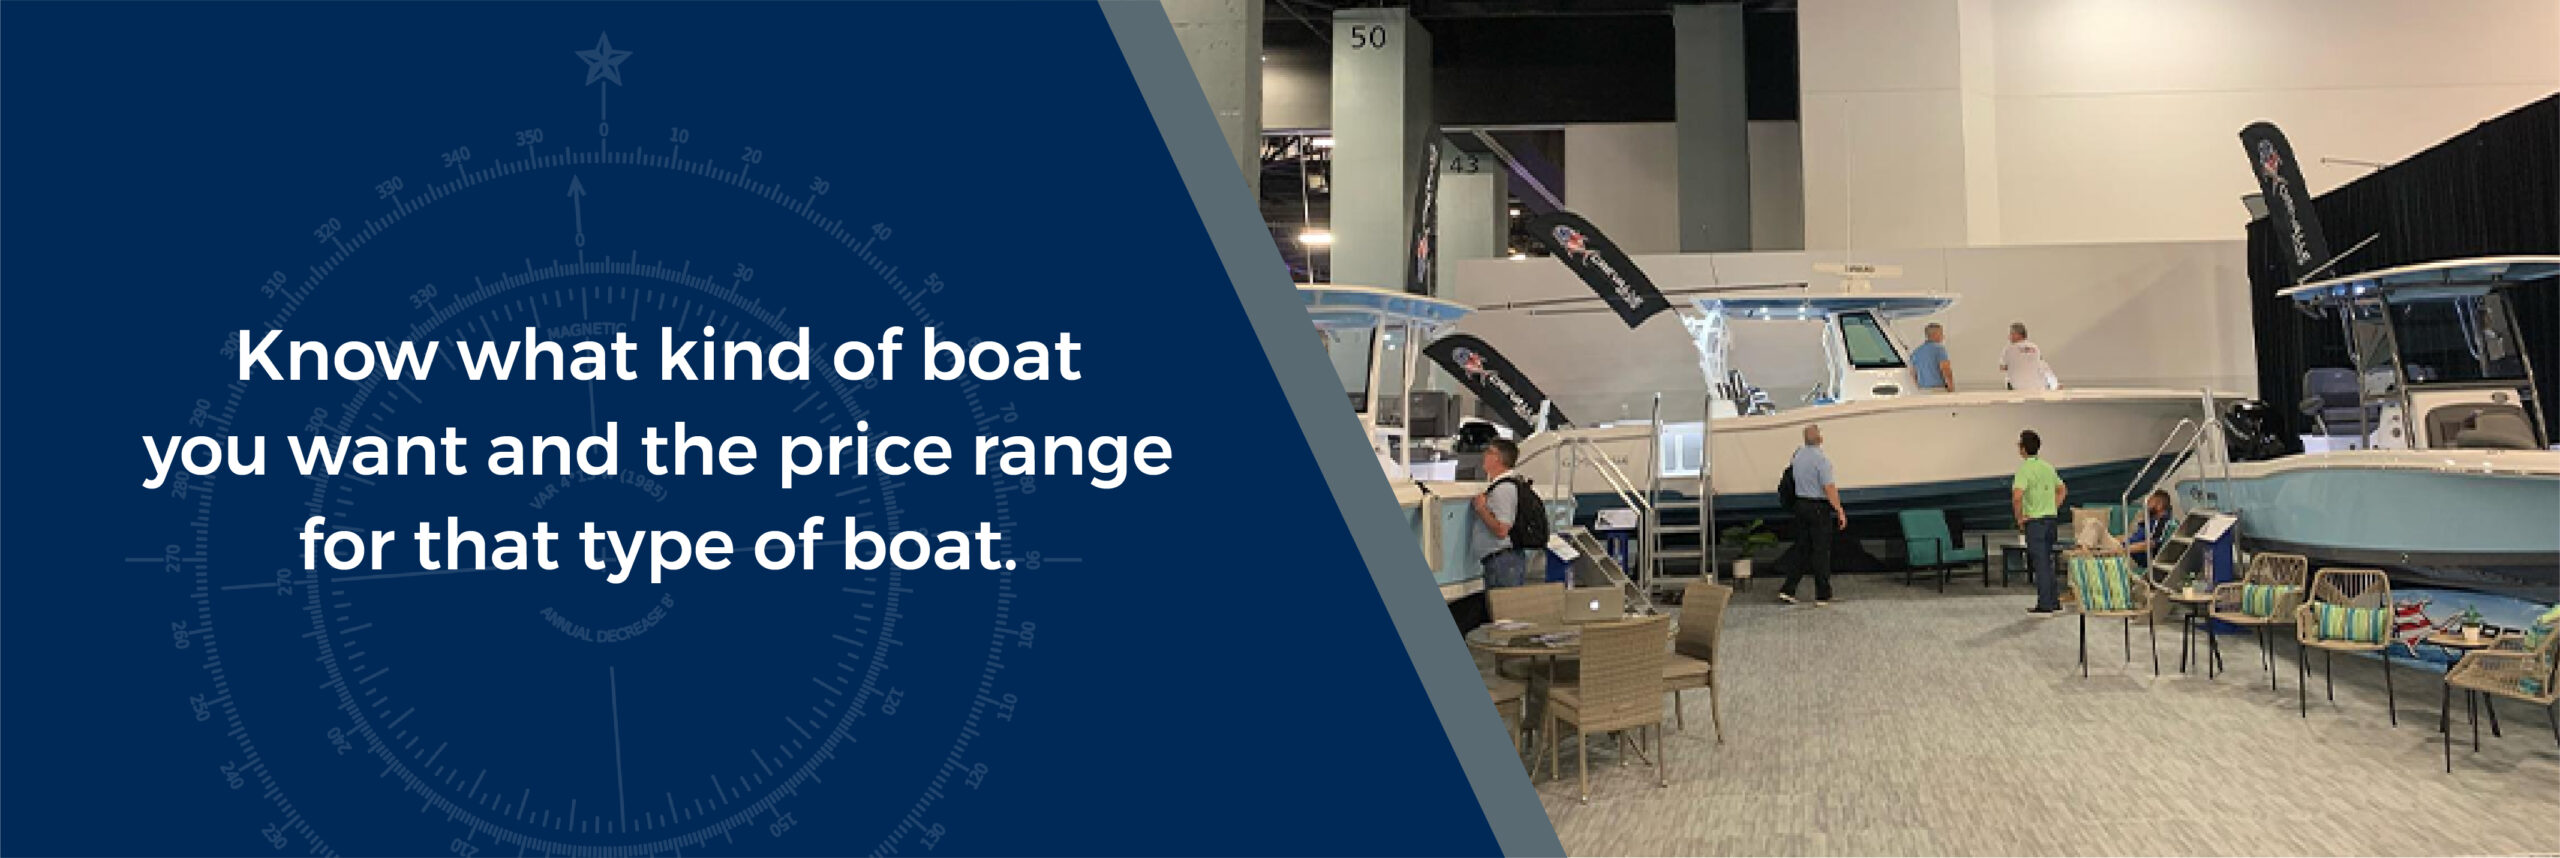 Know what kind of boat you want and the price range for that type of boat - People looking at a display of Crevalle boats at a Florida boat show